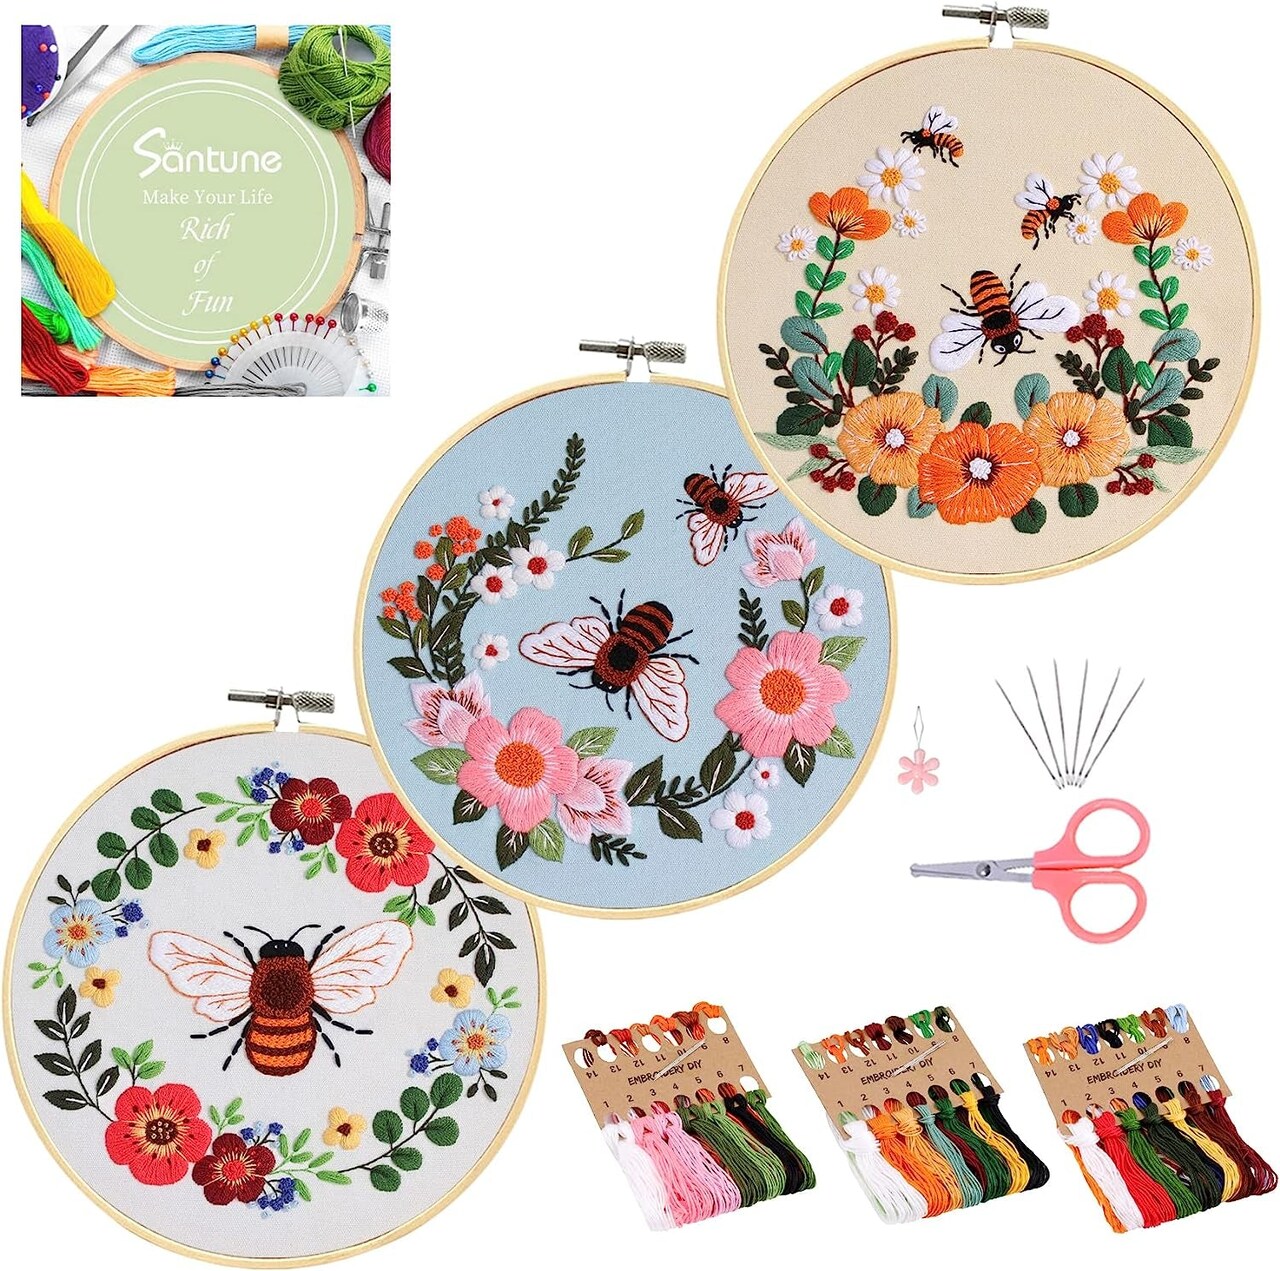 3 Sets Embroidery Starter Kit with Pattern and Instructions, Cross Stitch  Set, Stamped Kits Clothes Pattern, 1 Hoops